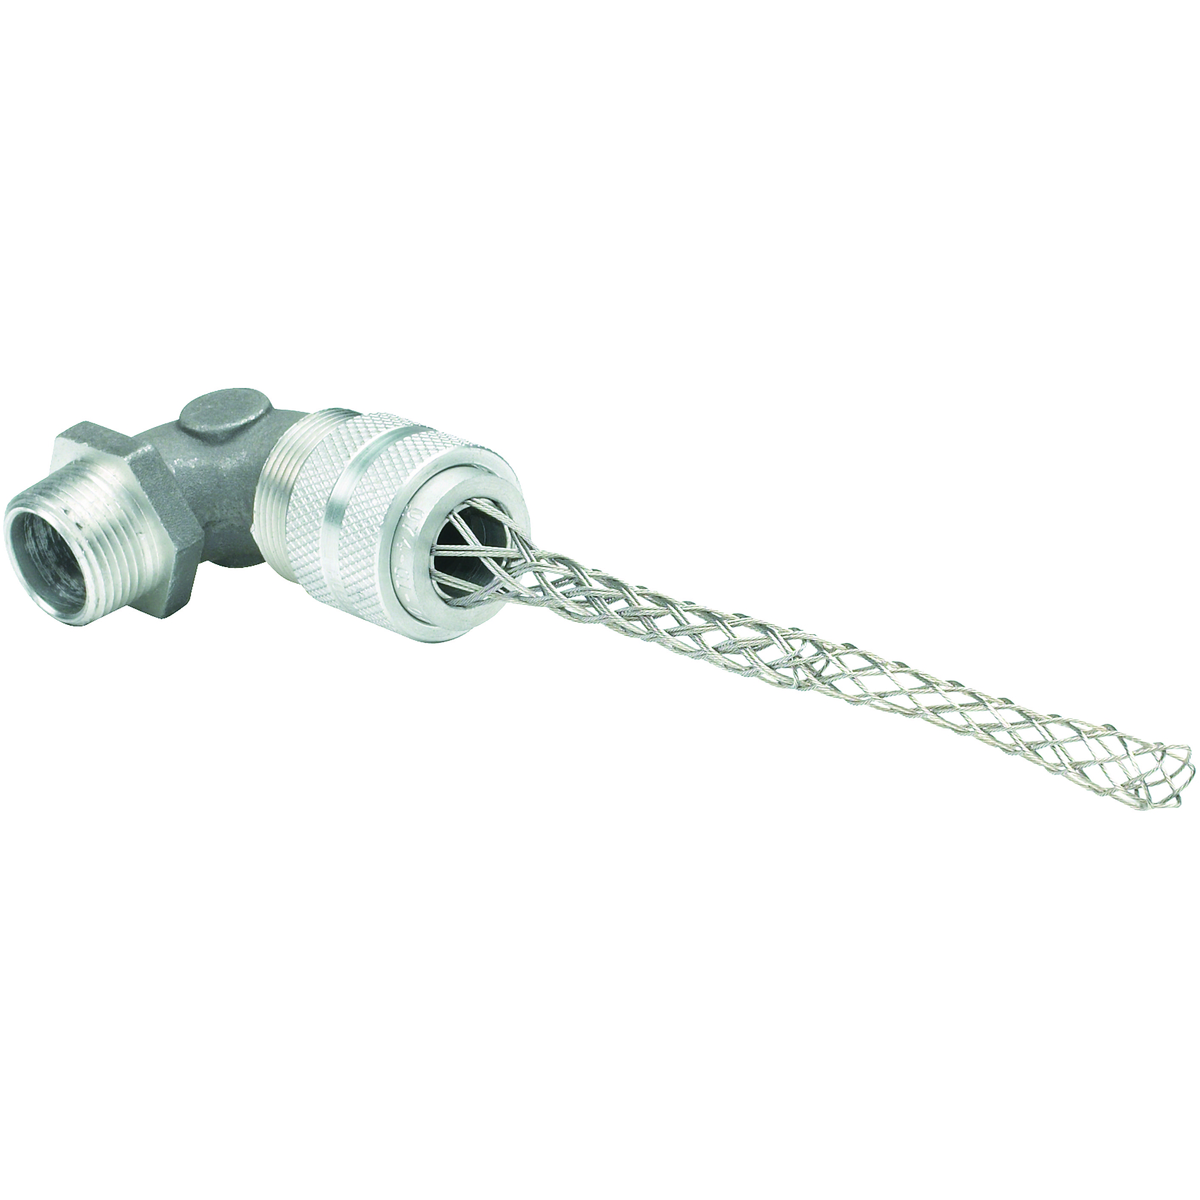 Z SERIES FITTINGS - Z NYLON CORD CONNECTOR WITH MESH GRIP - 90 DEGREES -NPT SIZE 3/4 IN - BLUE